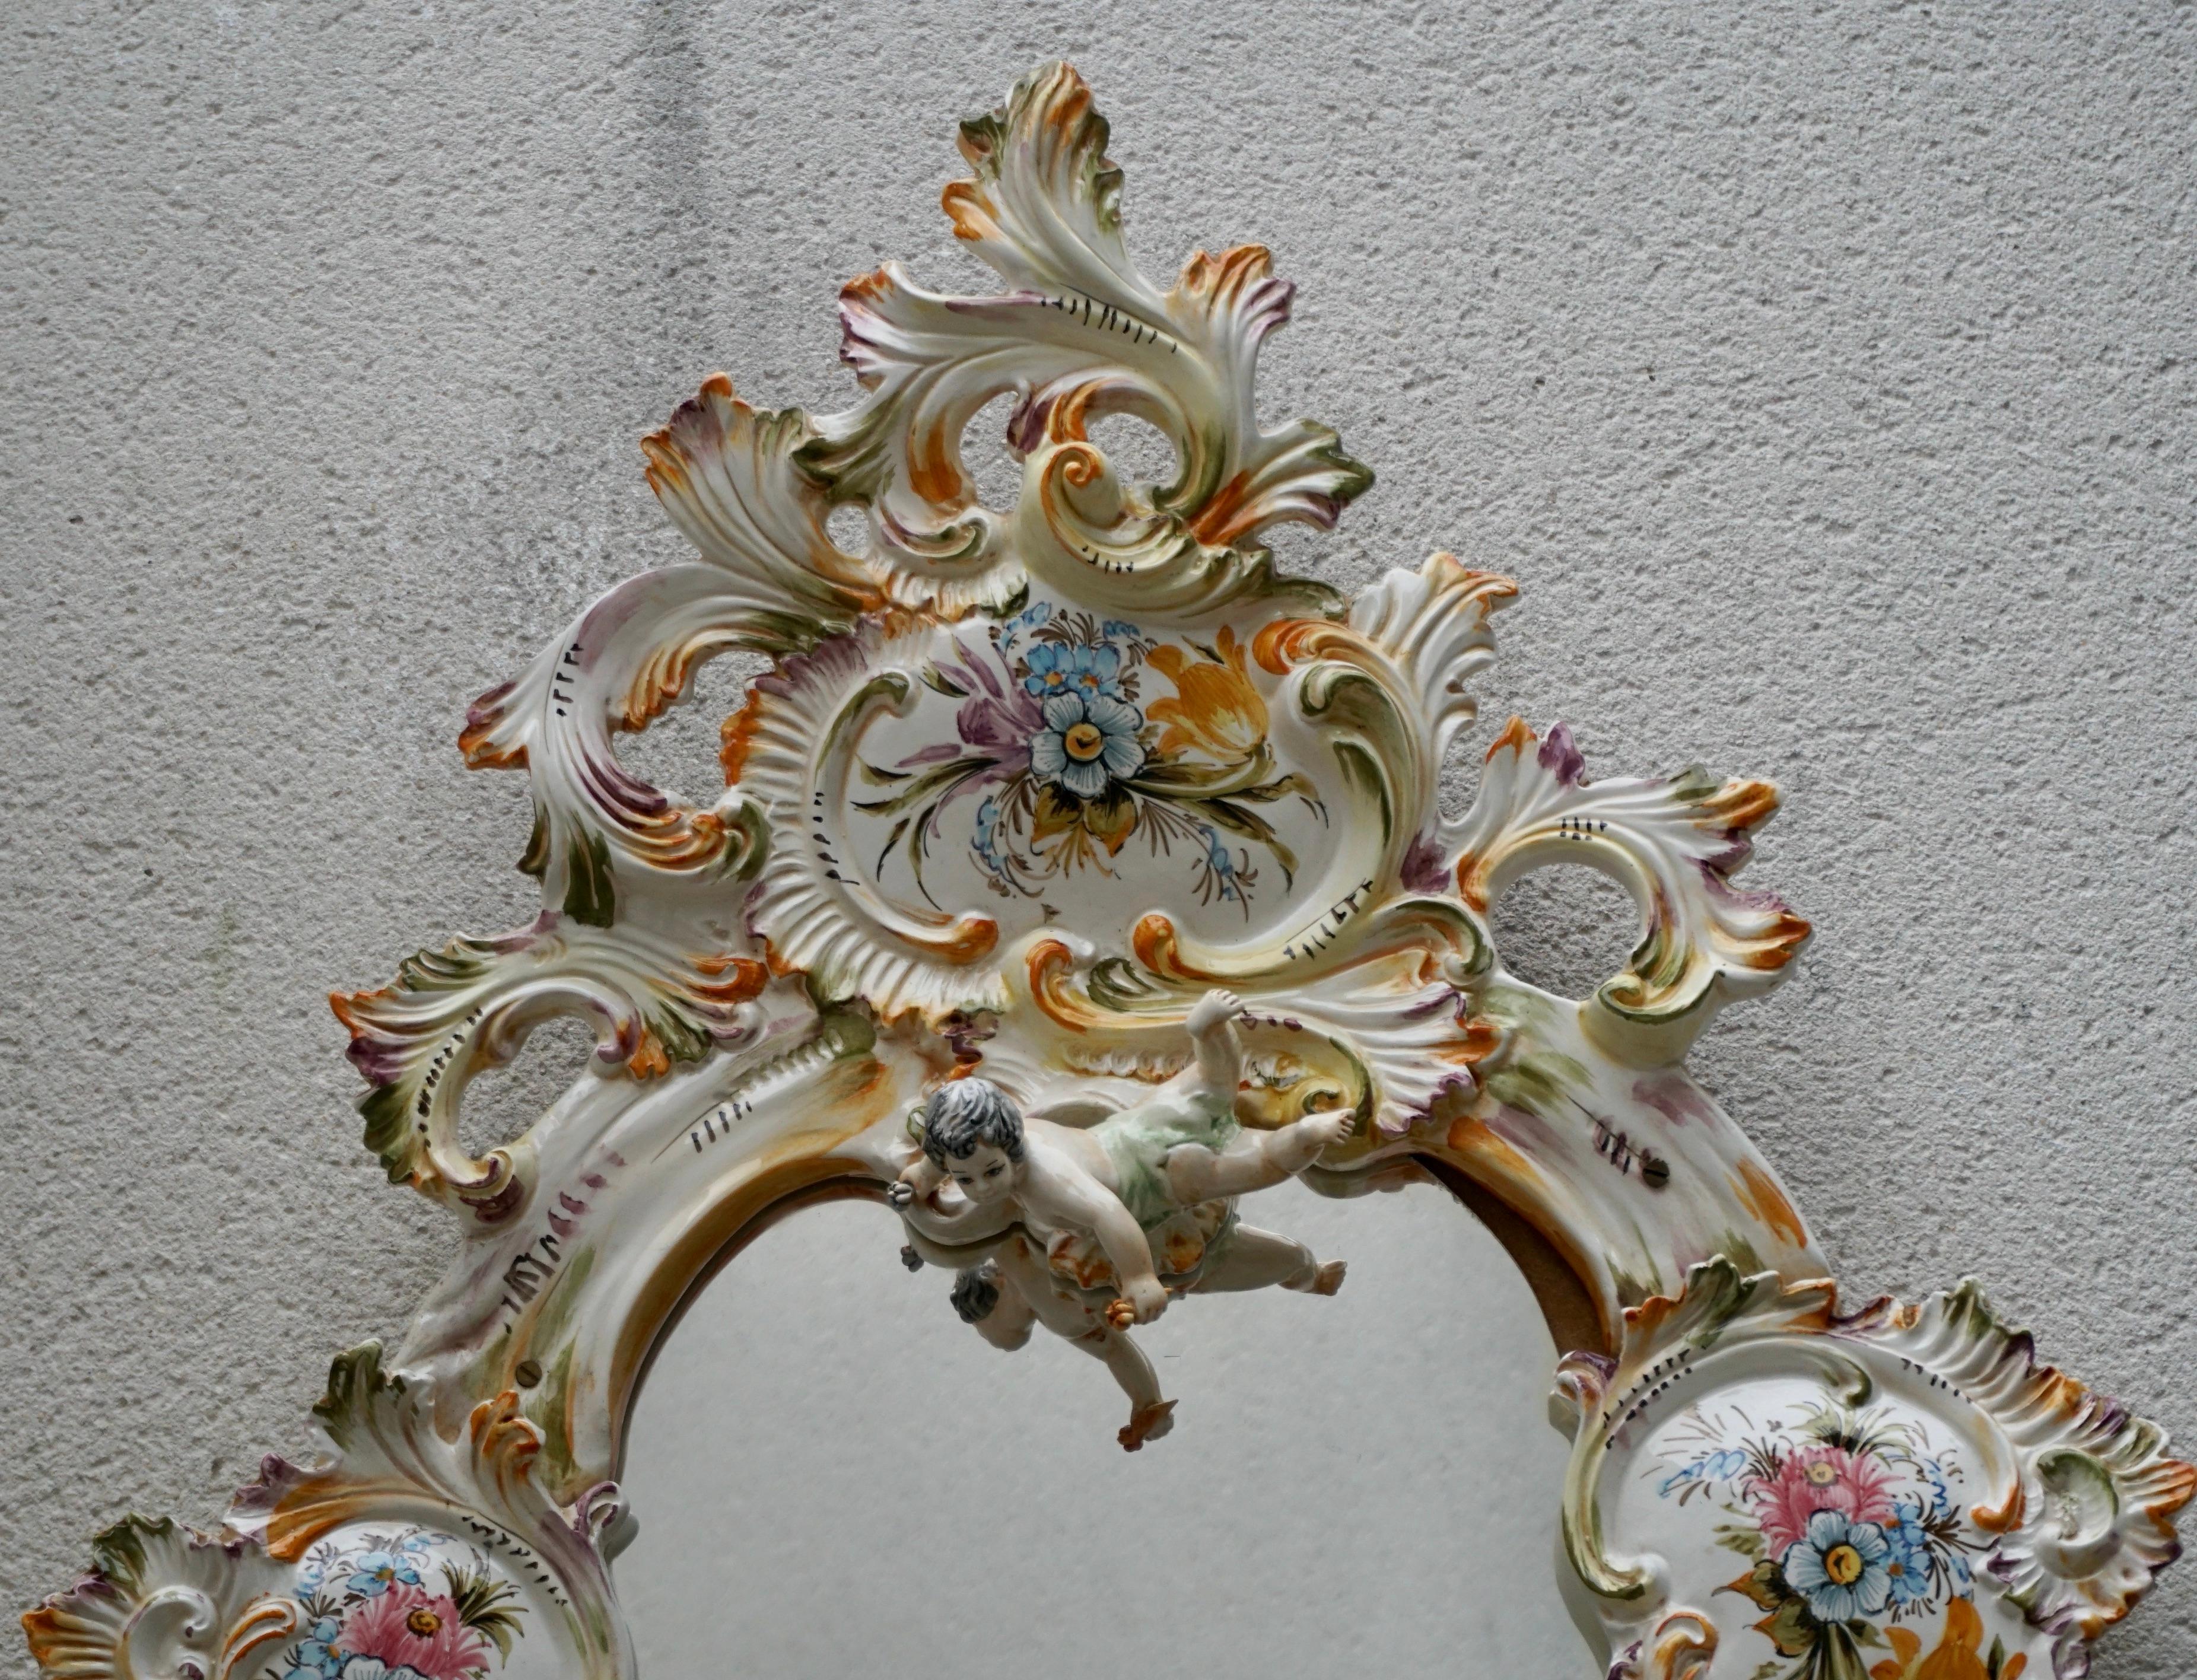 Mid-20th Century Italian Capodimonte Porcelain Mirror with Flowers and Cherubs For Sale 3